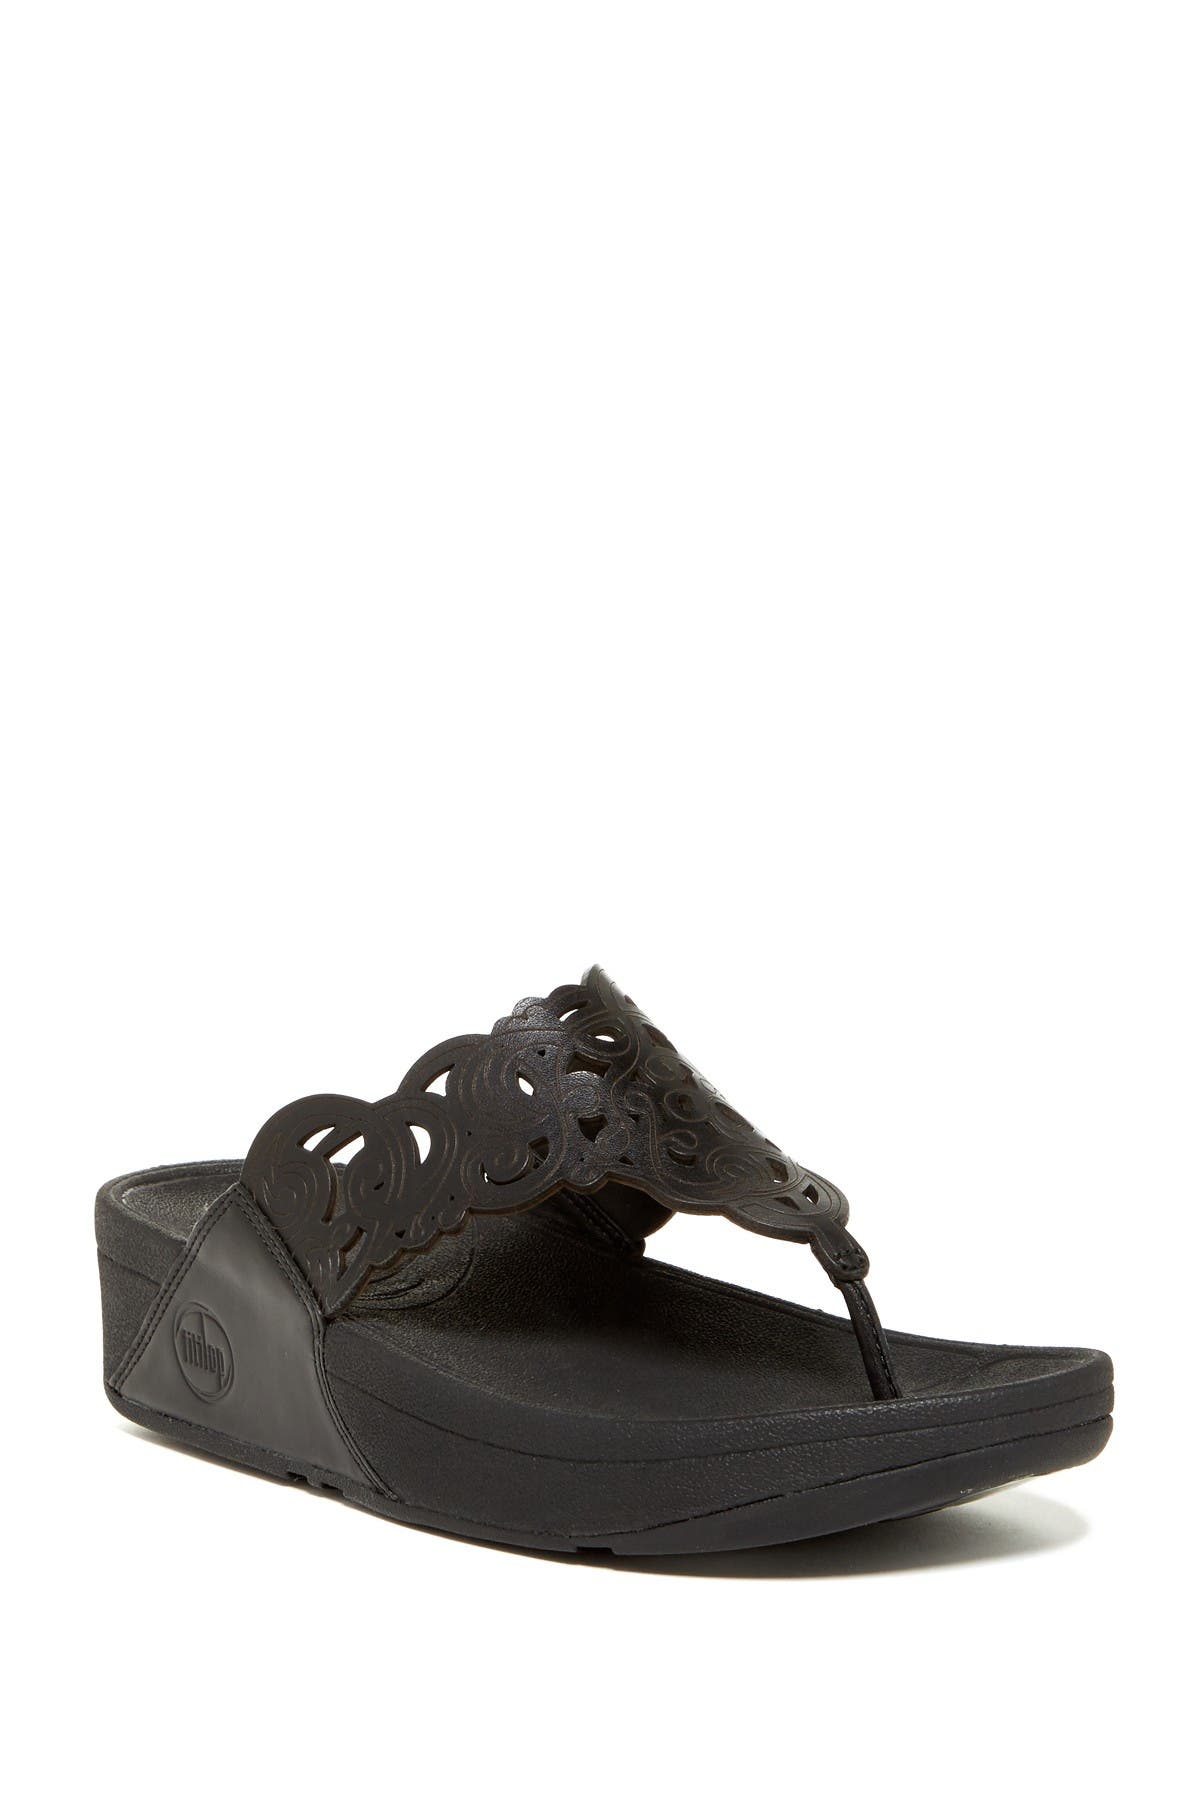 Fitflop | Flora Wedge Sandal 